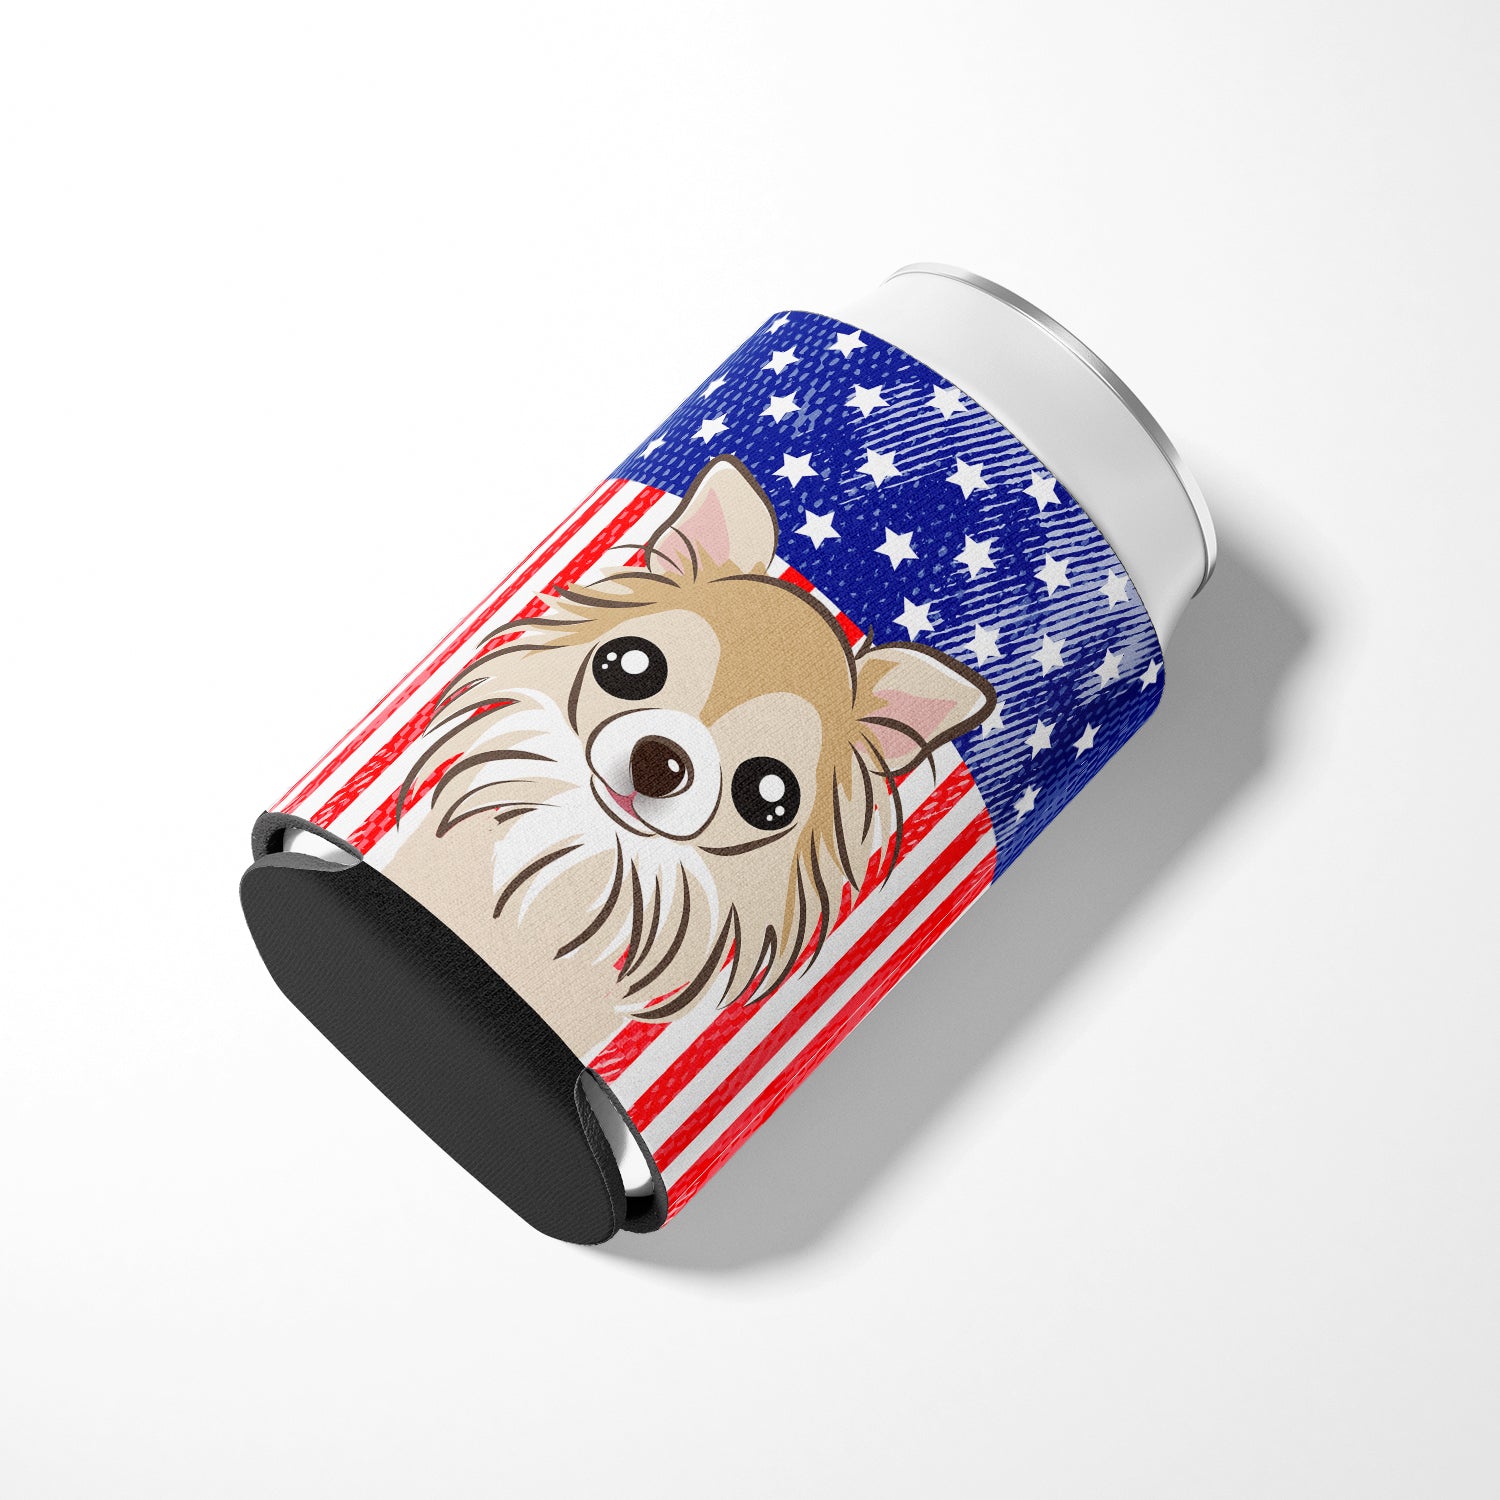 American Flag and Chihuahua Can or Bottle Hugger BB2181CC.